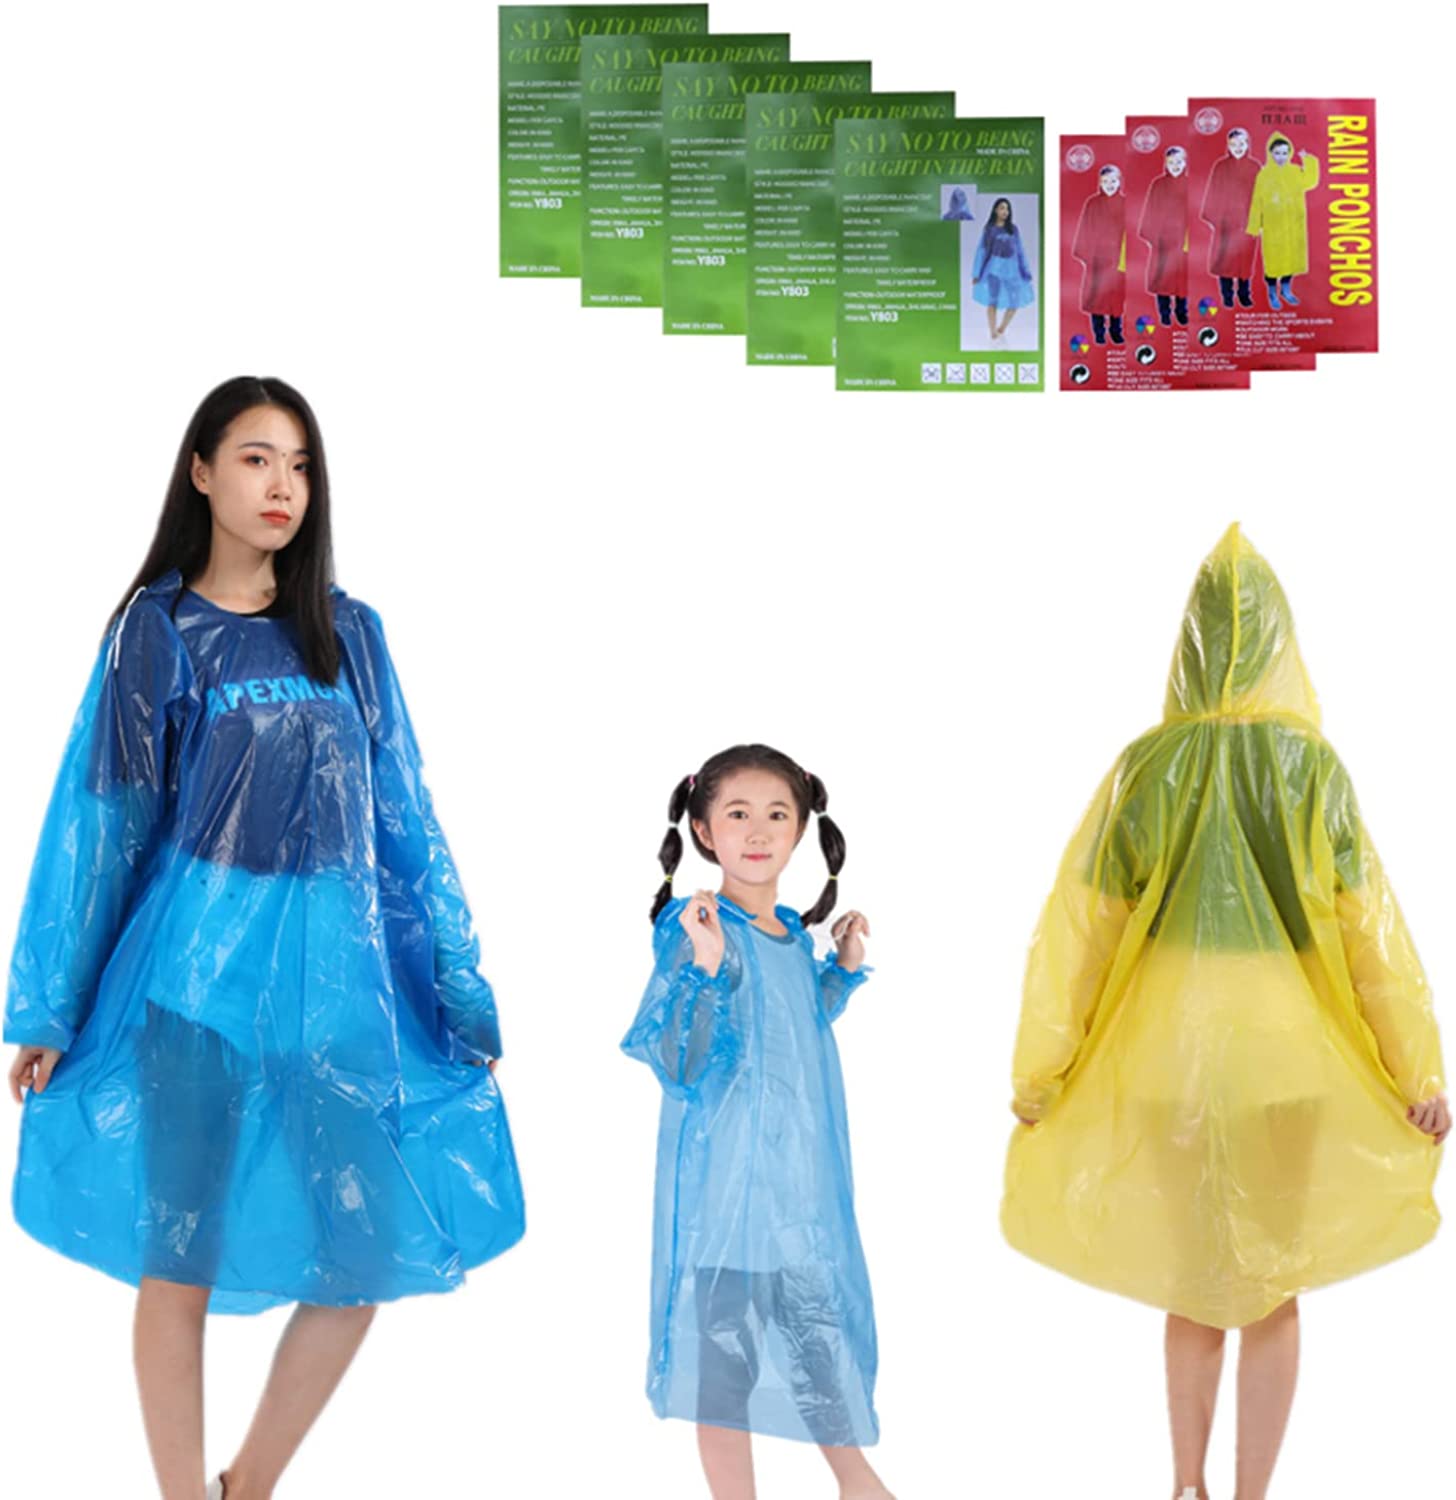 CHENJI 8 Pieces Disposable Rain Poncho, Disposable Emergency Raincoats for Adults and Children, Suitable for Playground or Outdoor Activities